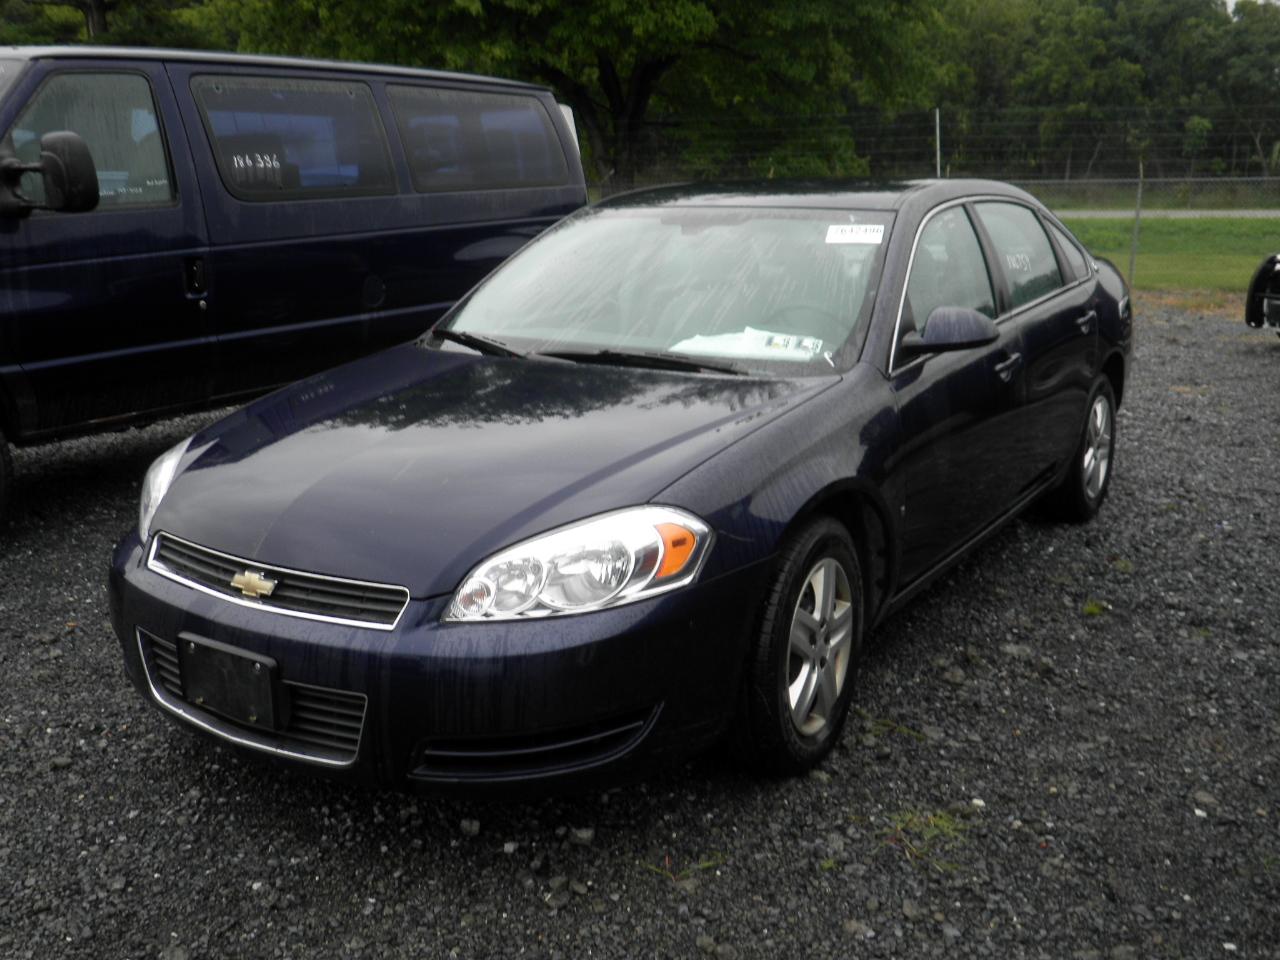 2008 Chevrolet Impala V6 Specifications And Details For